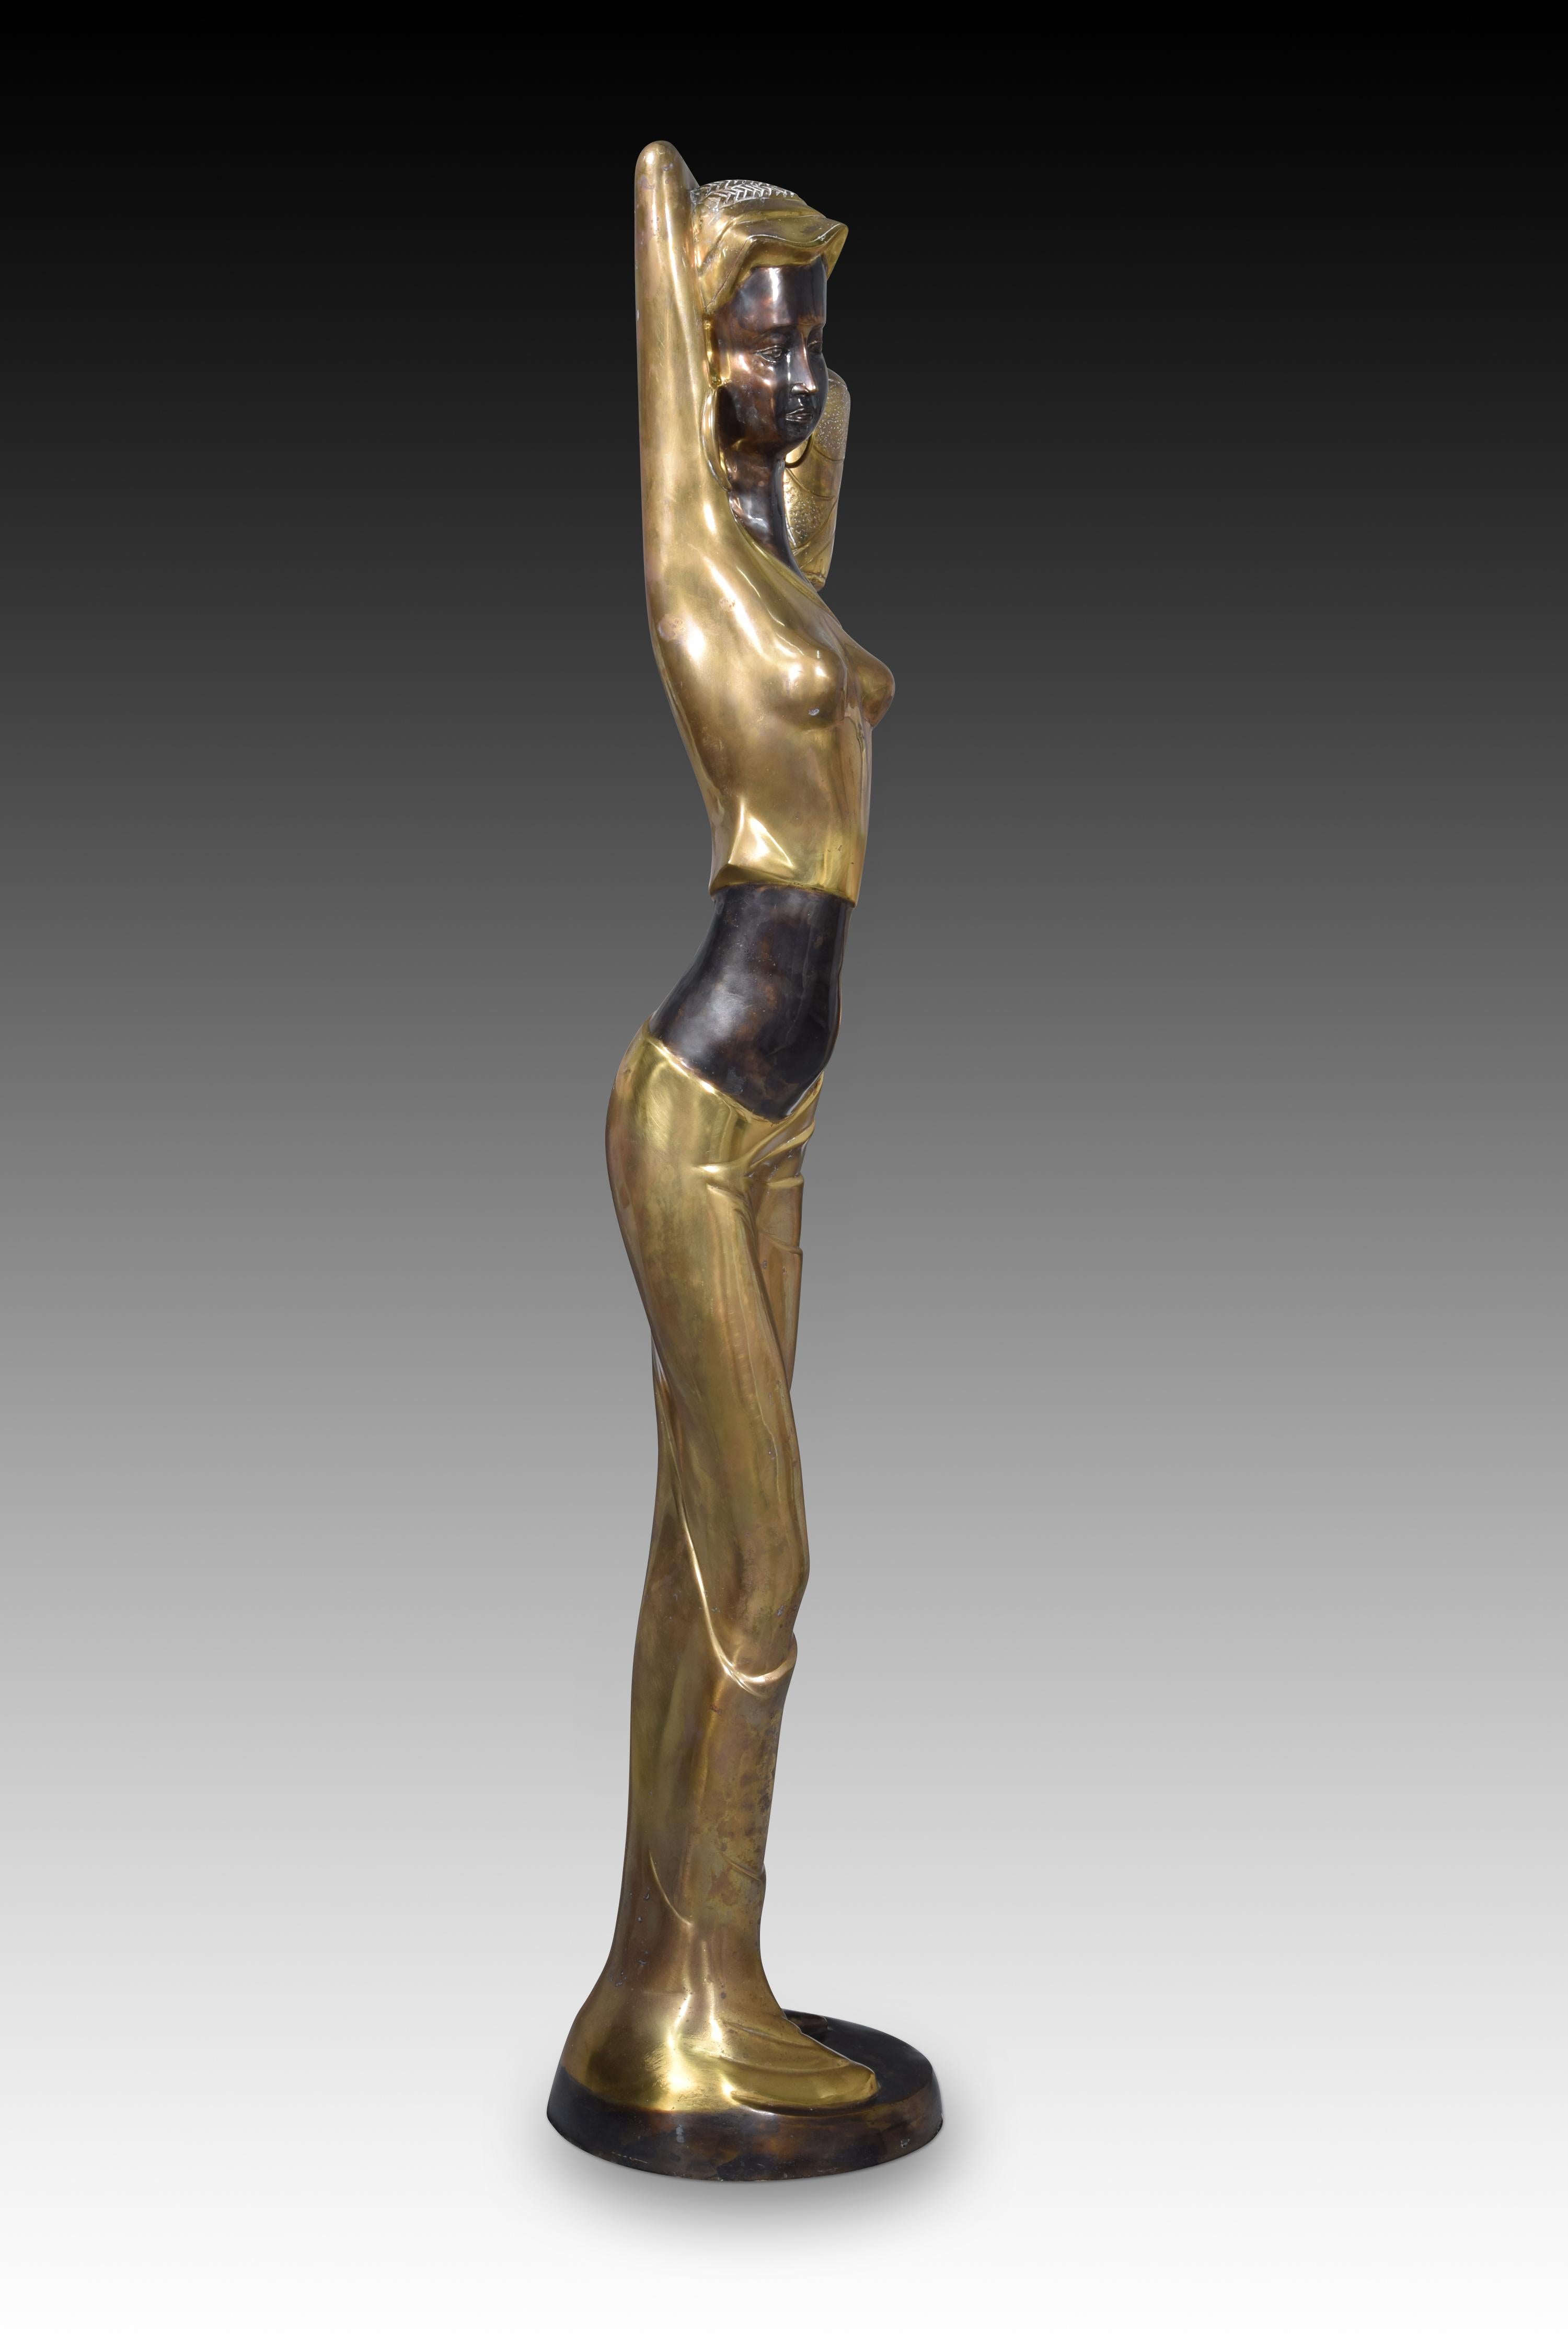 African water carrier. Bronze. Twentieth century. 
Sculpture with a certain Art Deco reminiscence that presents a female figure with large hoop earrings and a jug in her hands. Material finishes are combined, leaving certain areas in a dark tone to